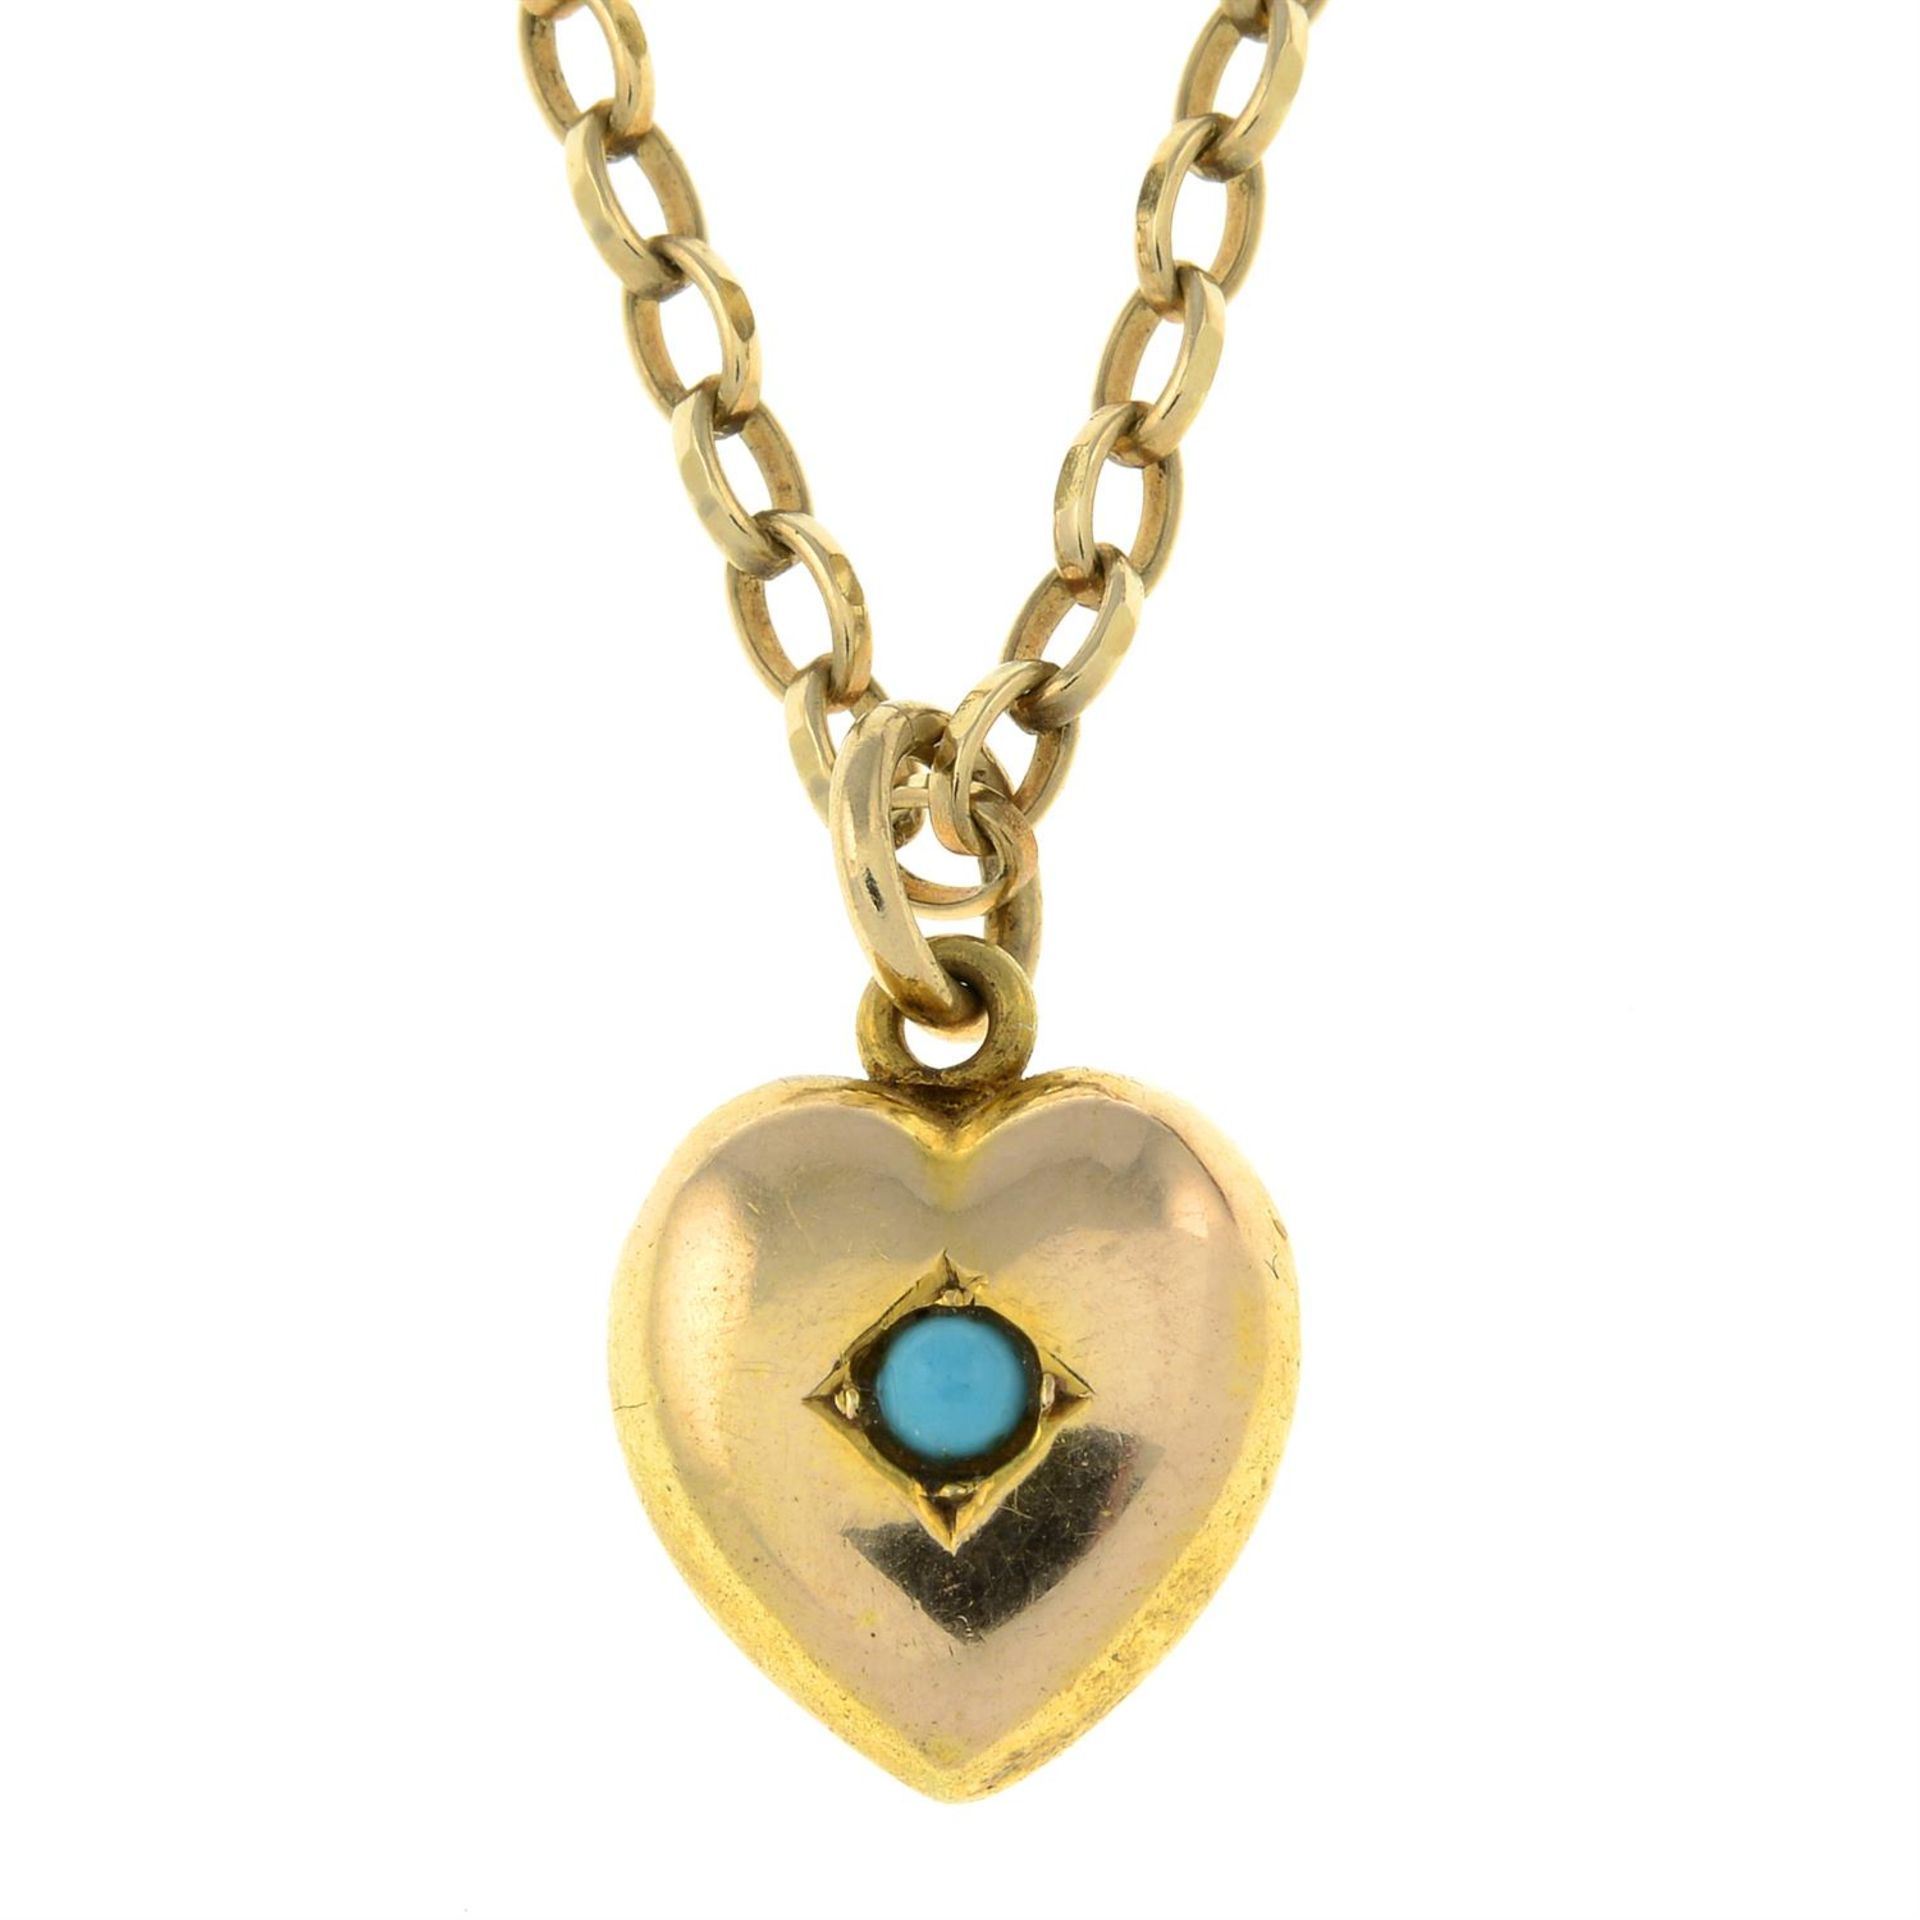 A heart pendant, with turquoise highlight, suspended from a 9ct gold chain.